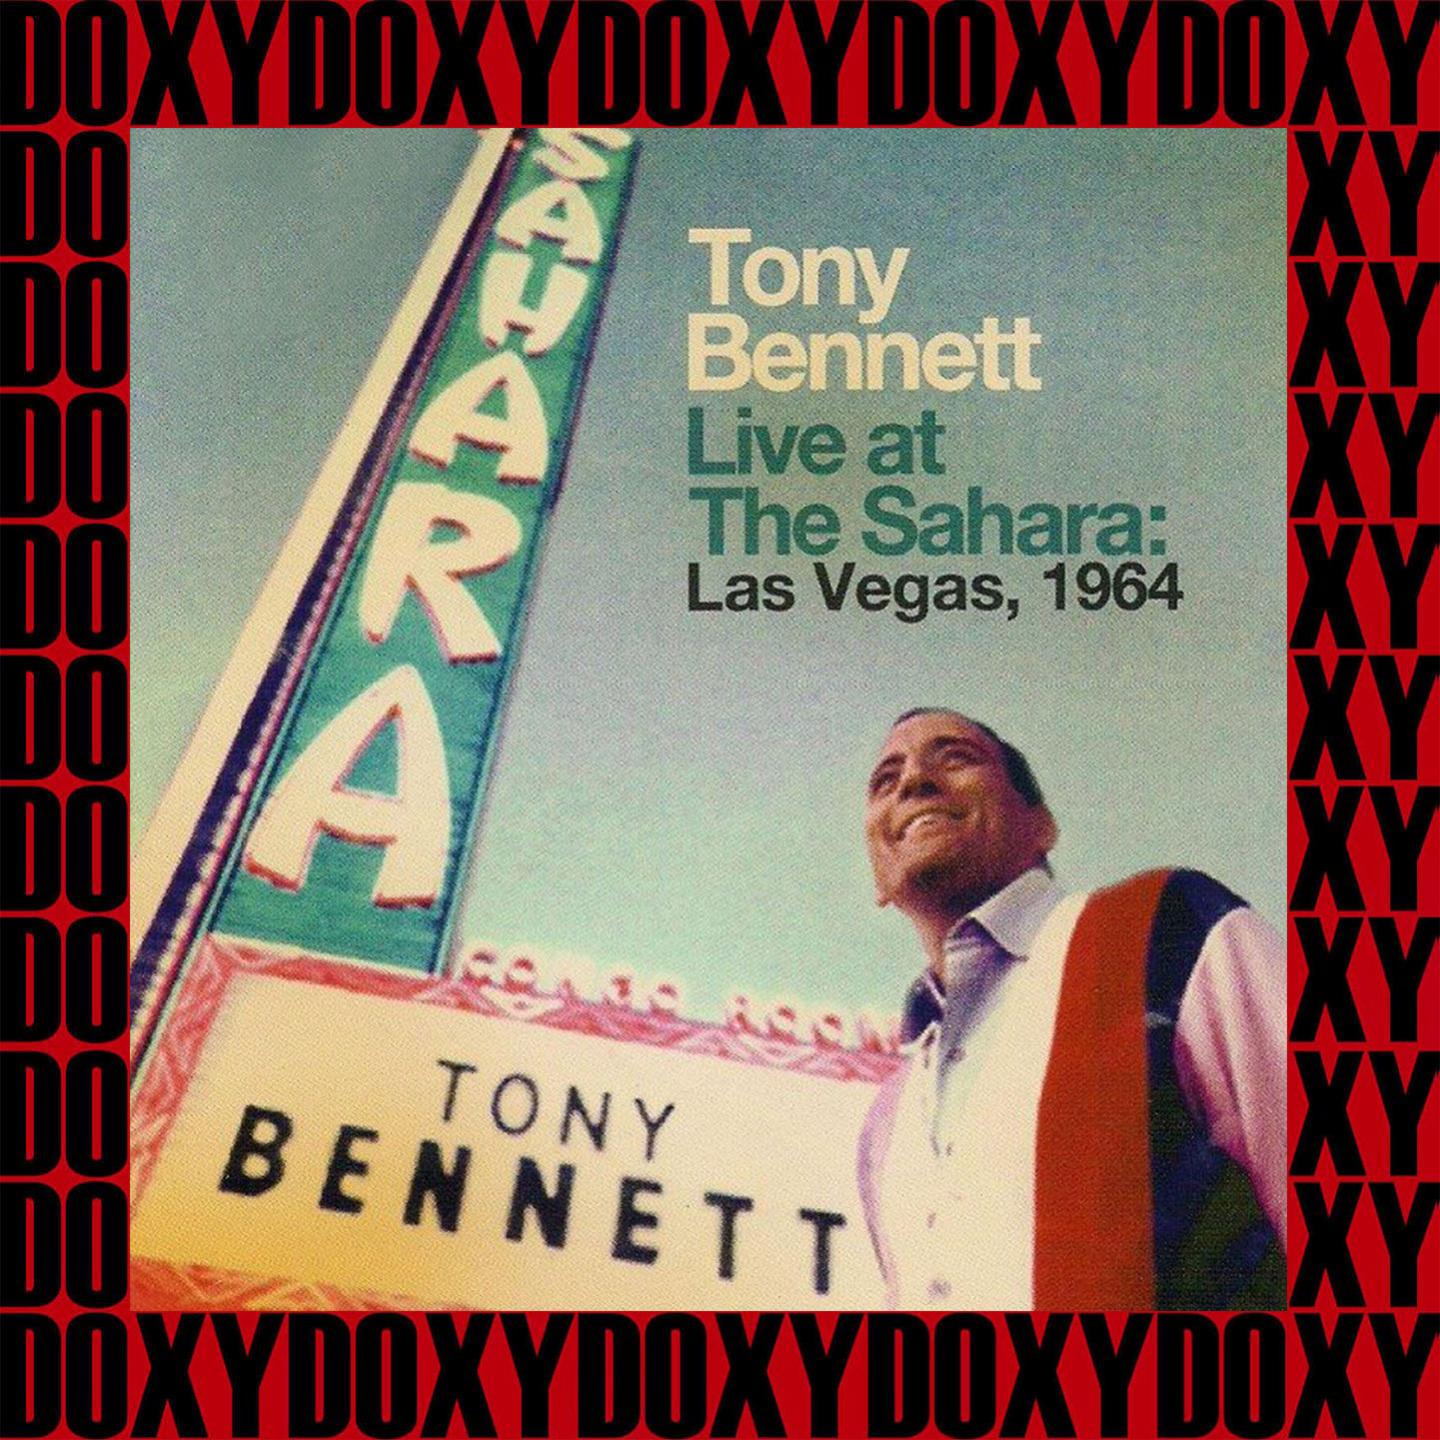 Live At The Sahara - Las Vegas, 1964 (Remastered Version) (Doxy Collection)